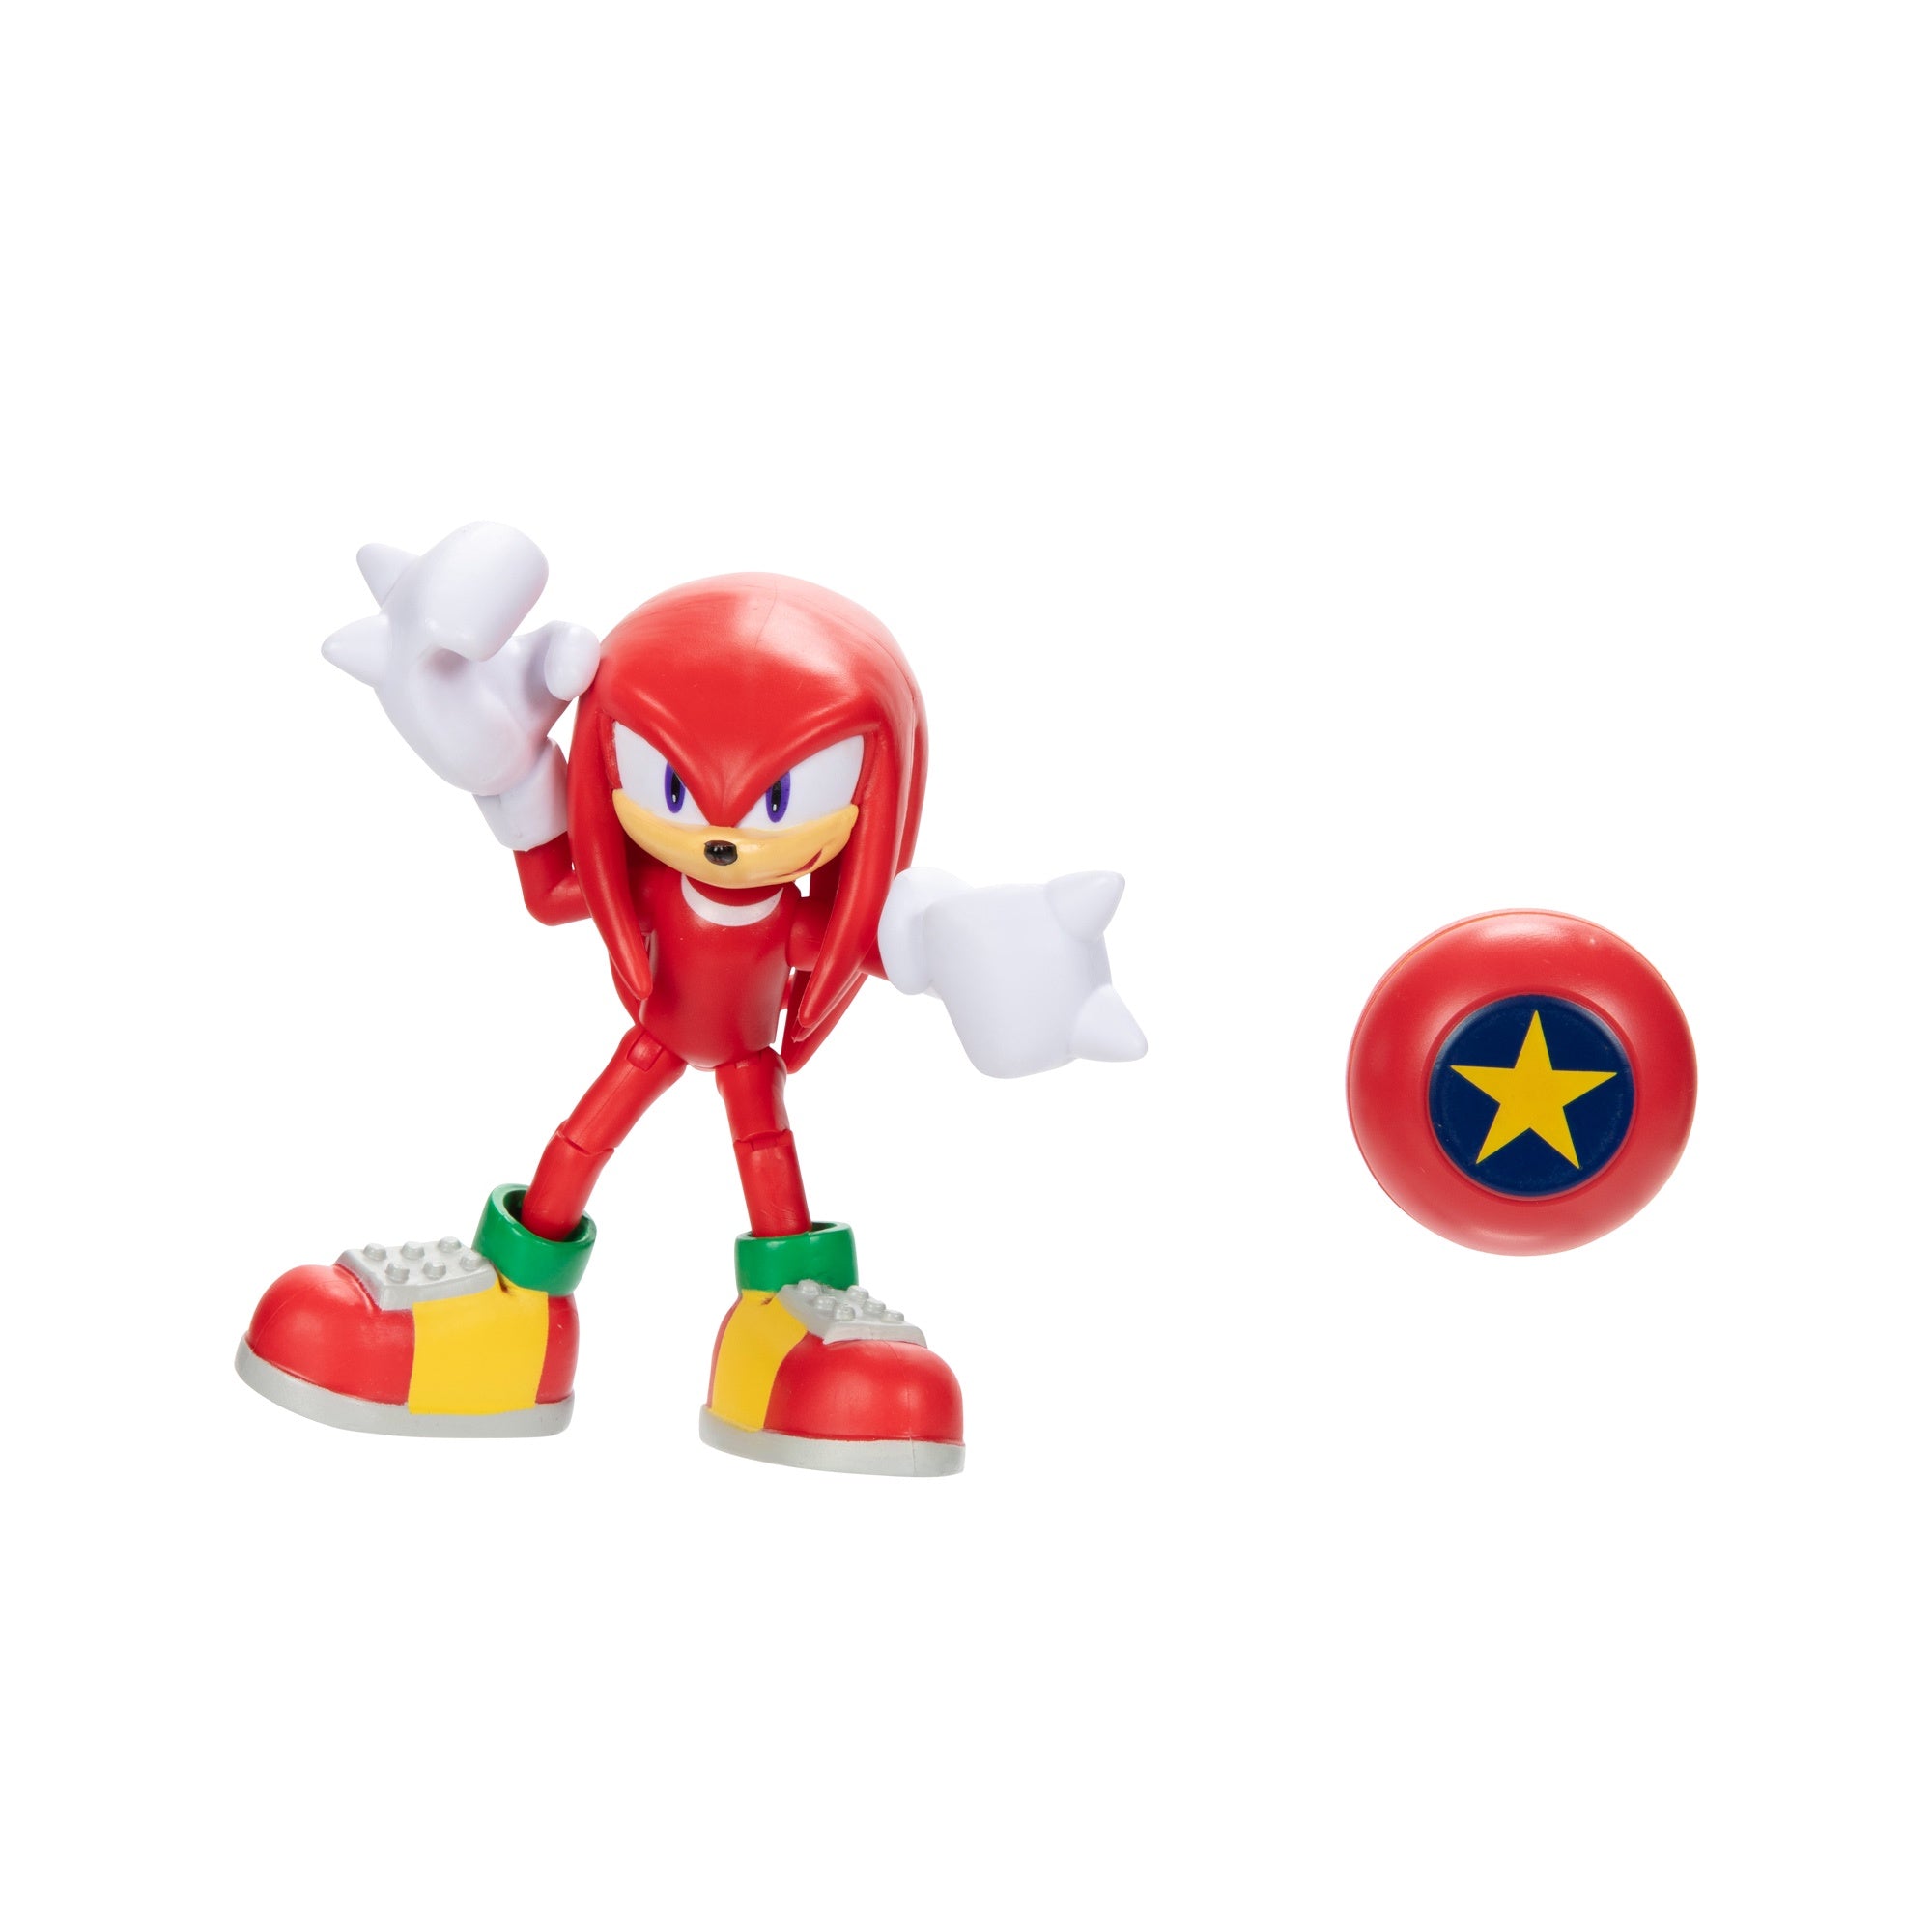 Sonic The Hedgehog 4" Figure Knuckles With Accessory